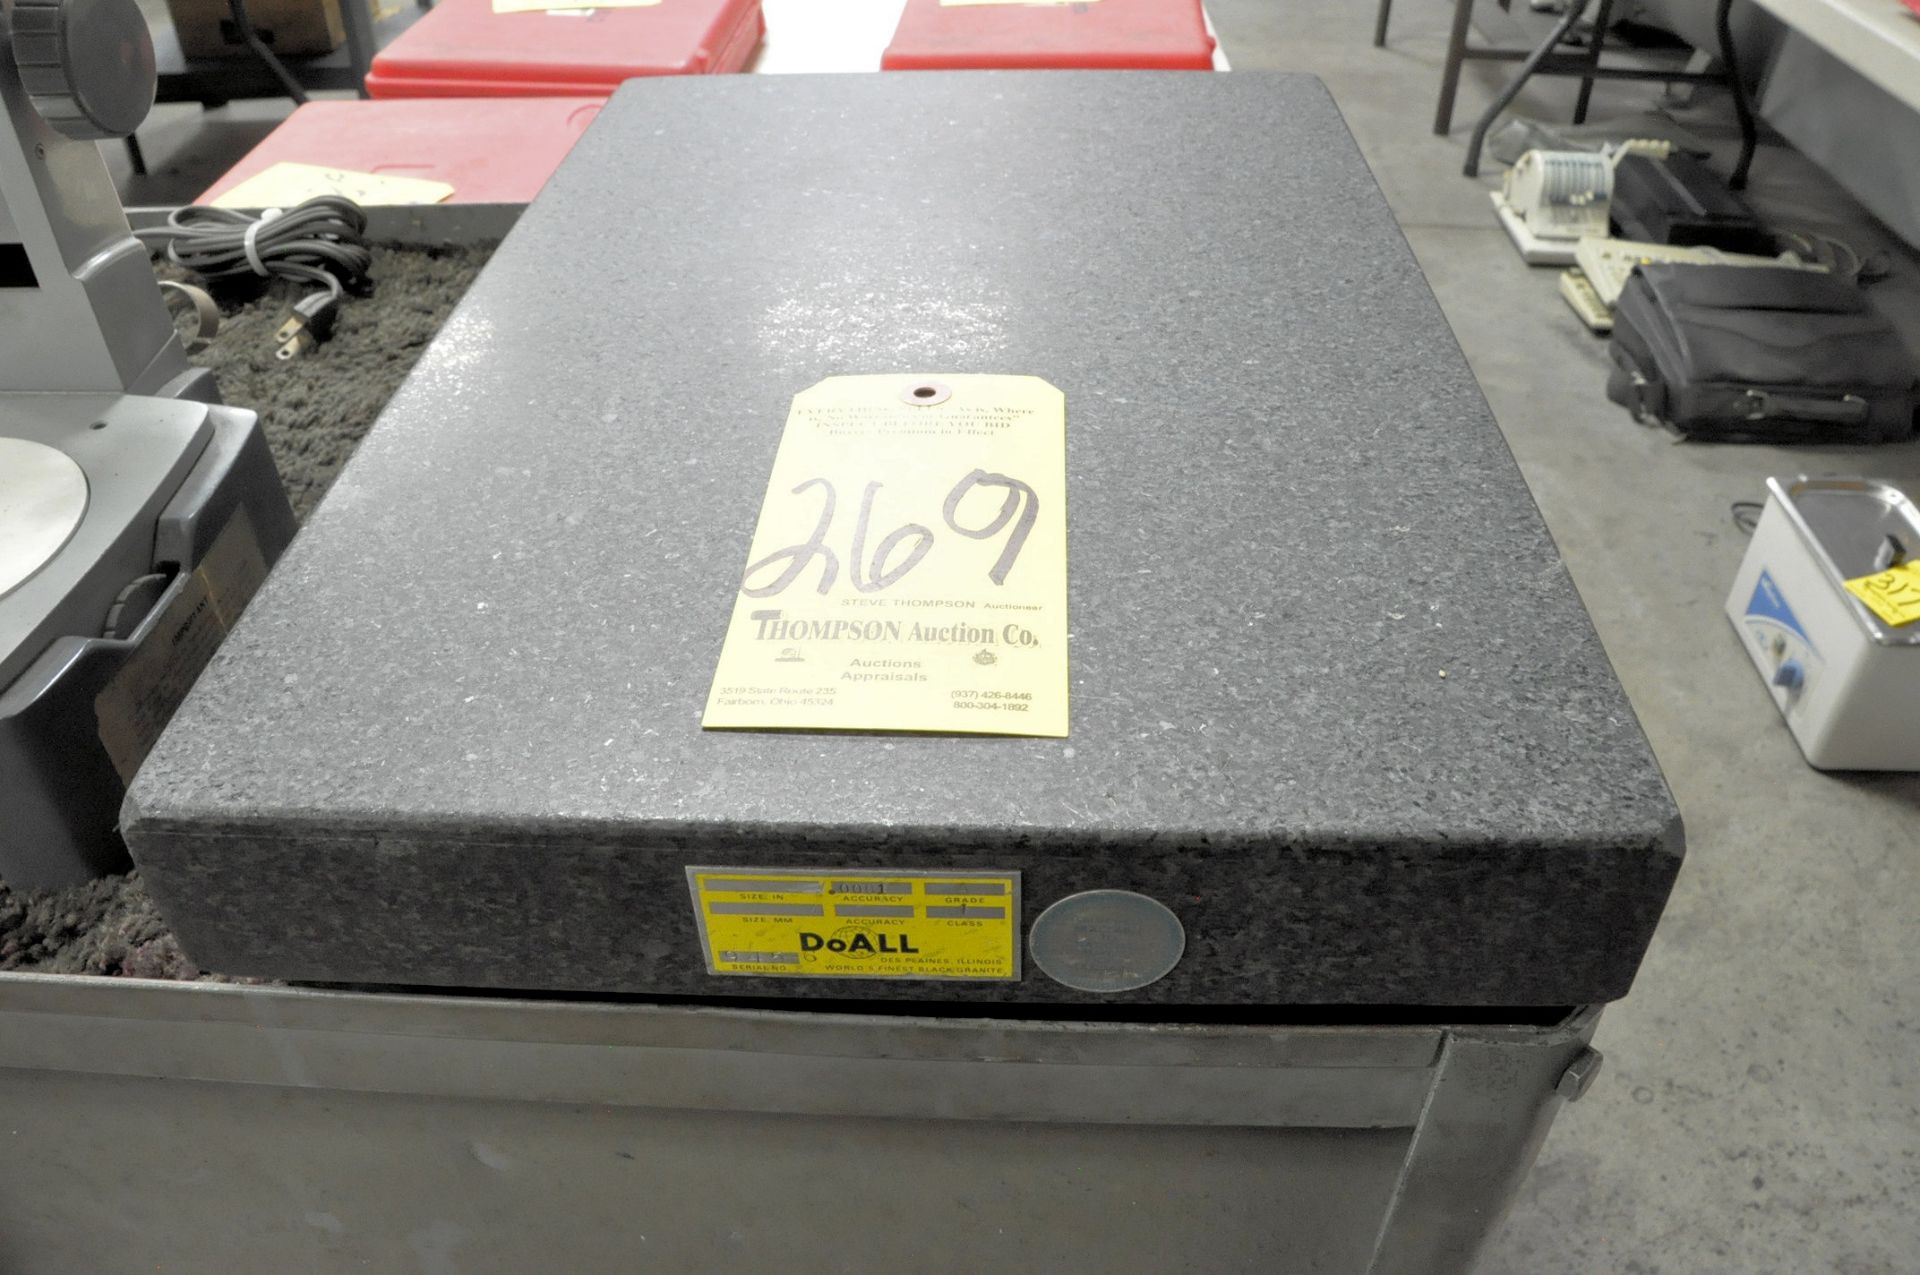 Do All 12" x 18" x 4" 2-Ledge Black Granite Surface Plate with Cart, (Microscope not Included)